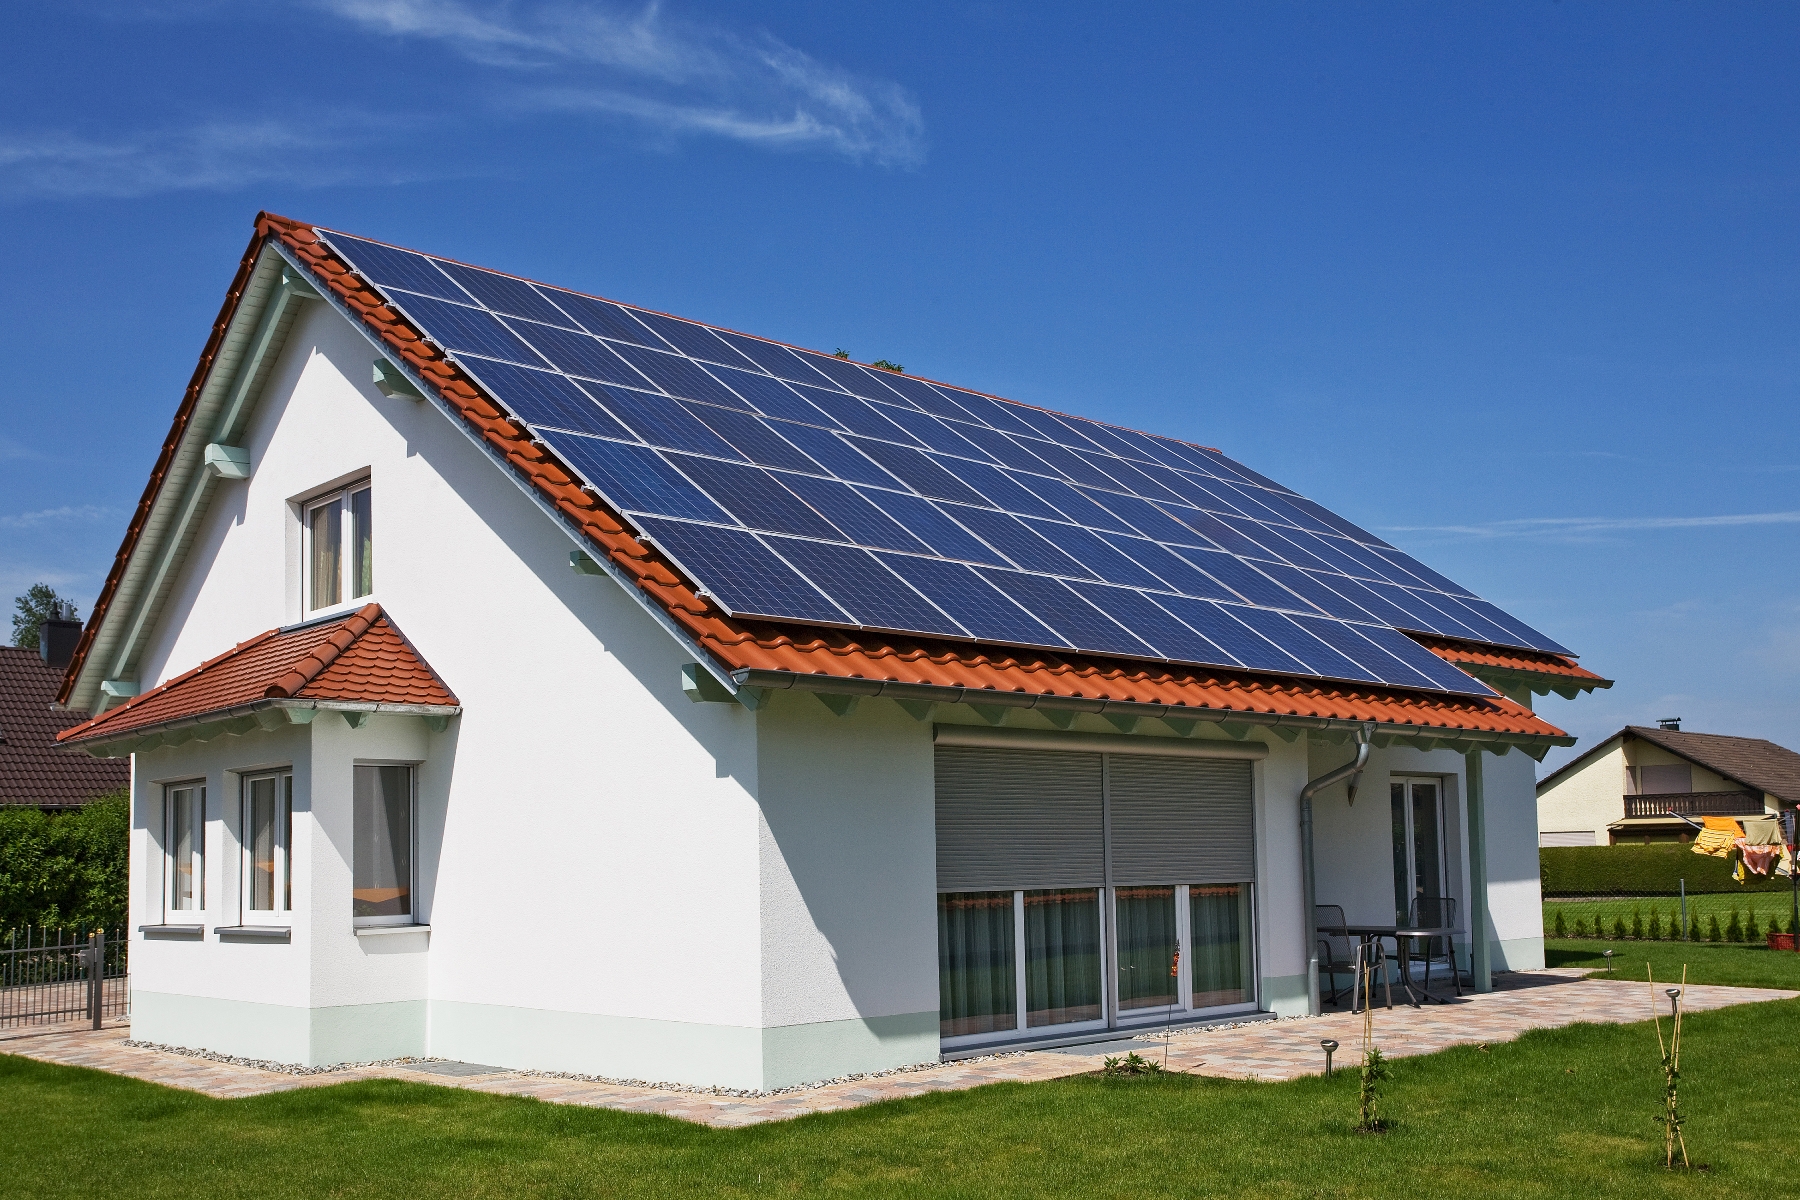 How Utilities Can Make the Most of Distributed Energy Resources